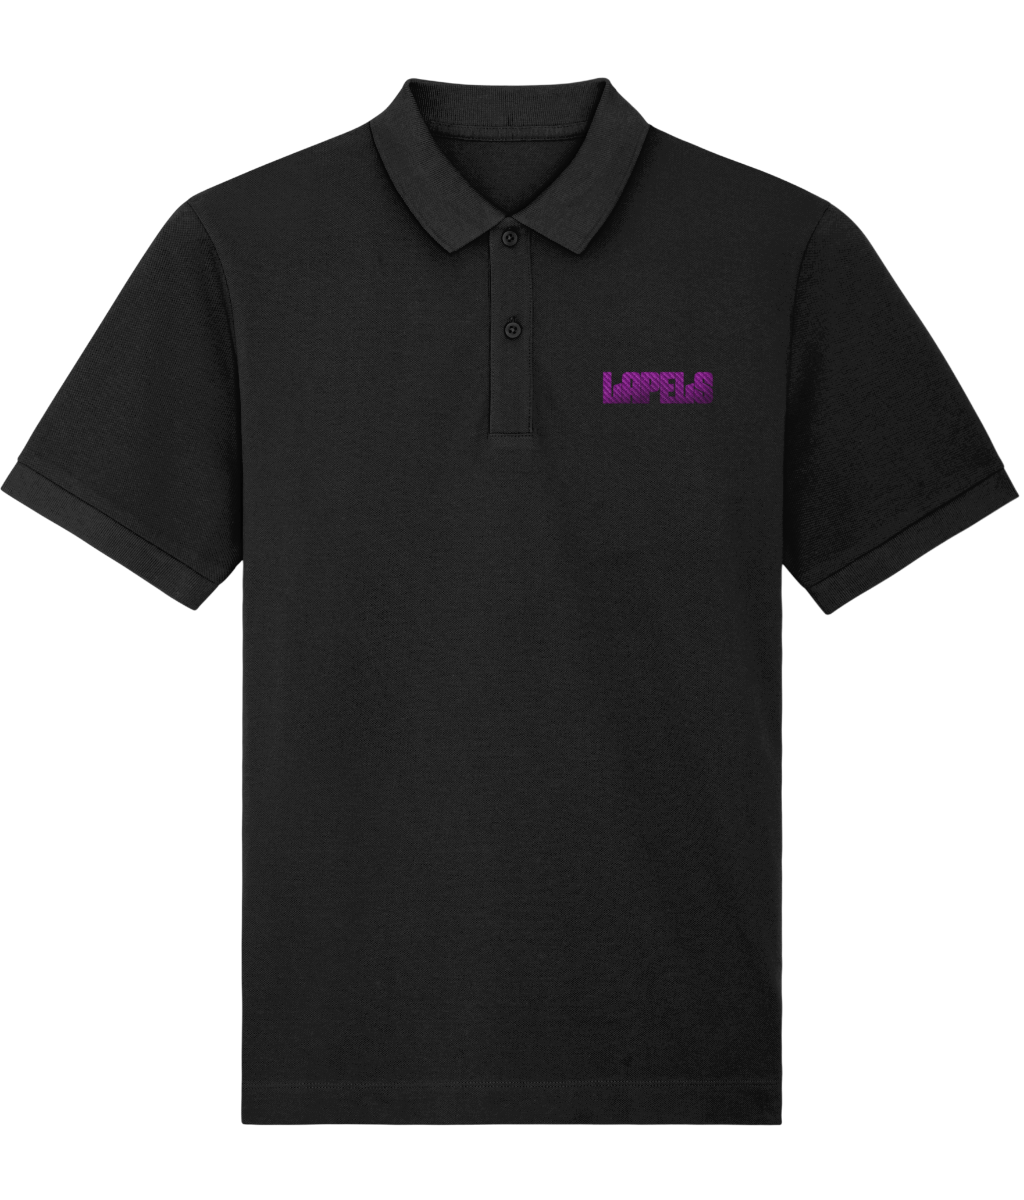 Lapels Embroidered Polo Shirt